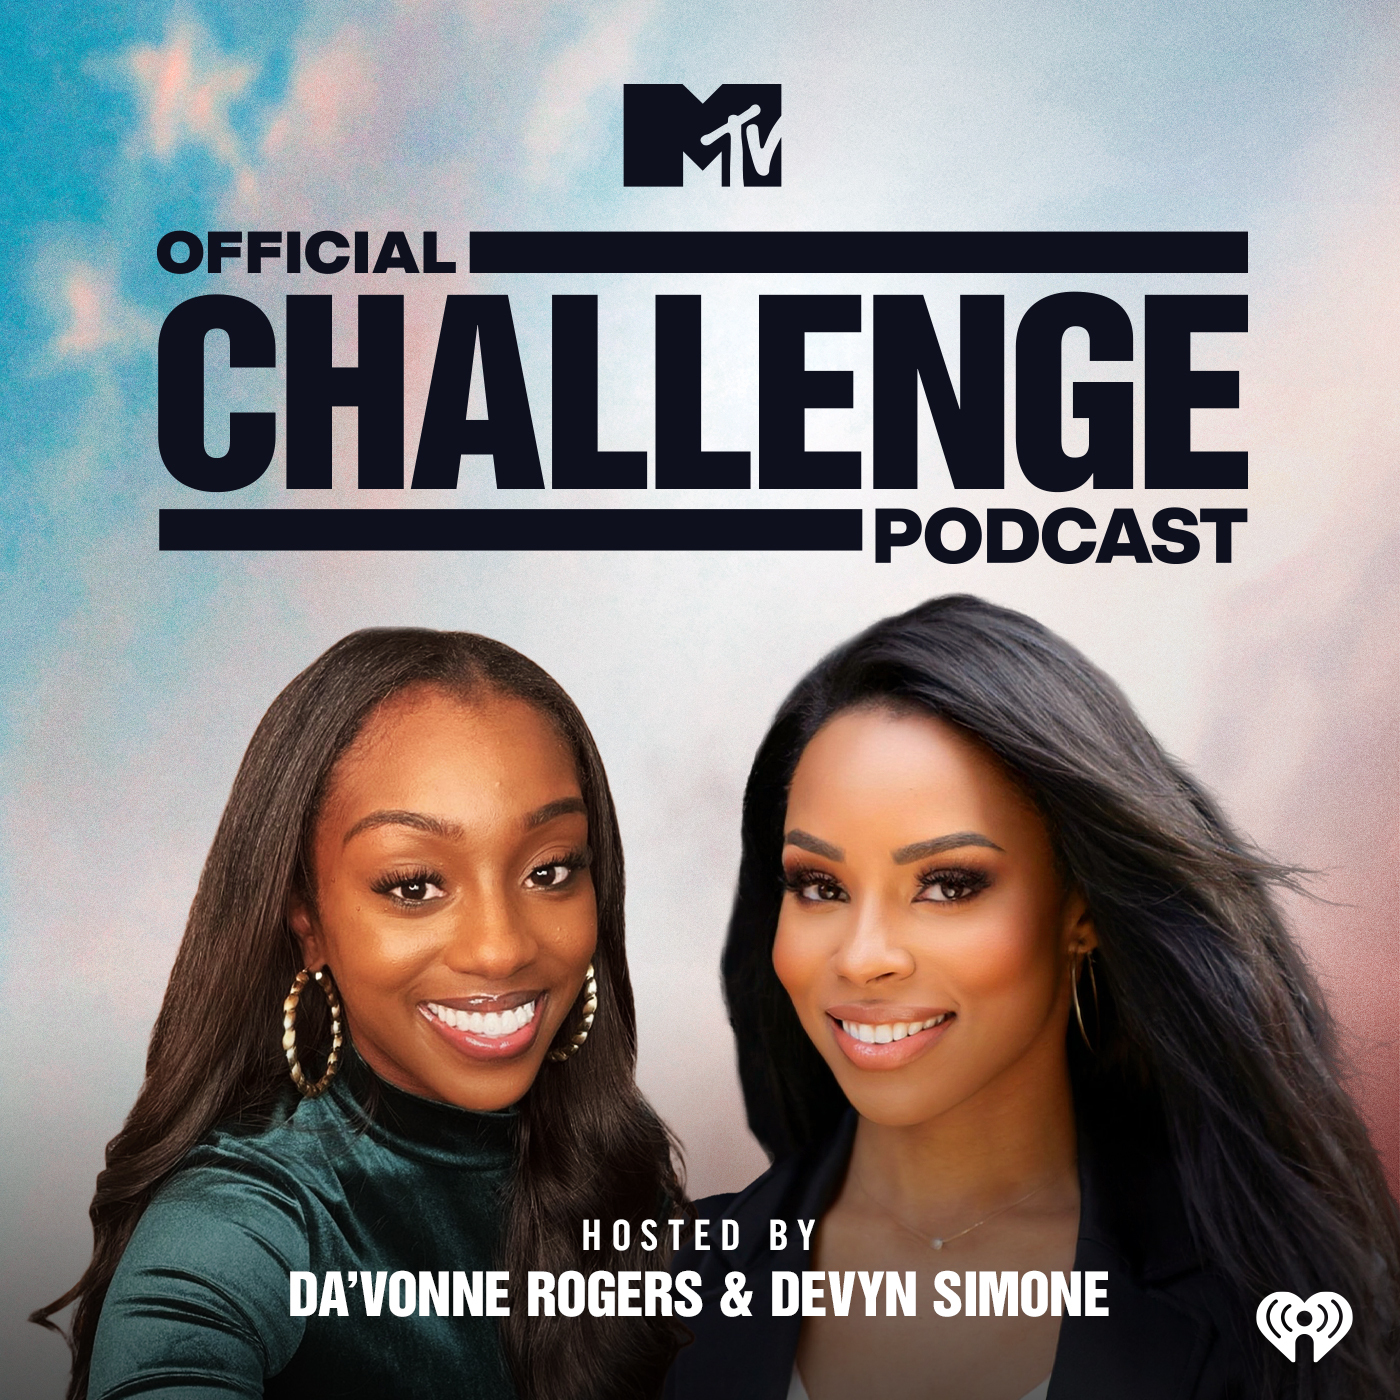 Introducing The Challenge: USA with Da'Vonne Rogers & Devyn Simone